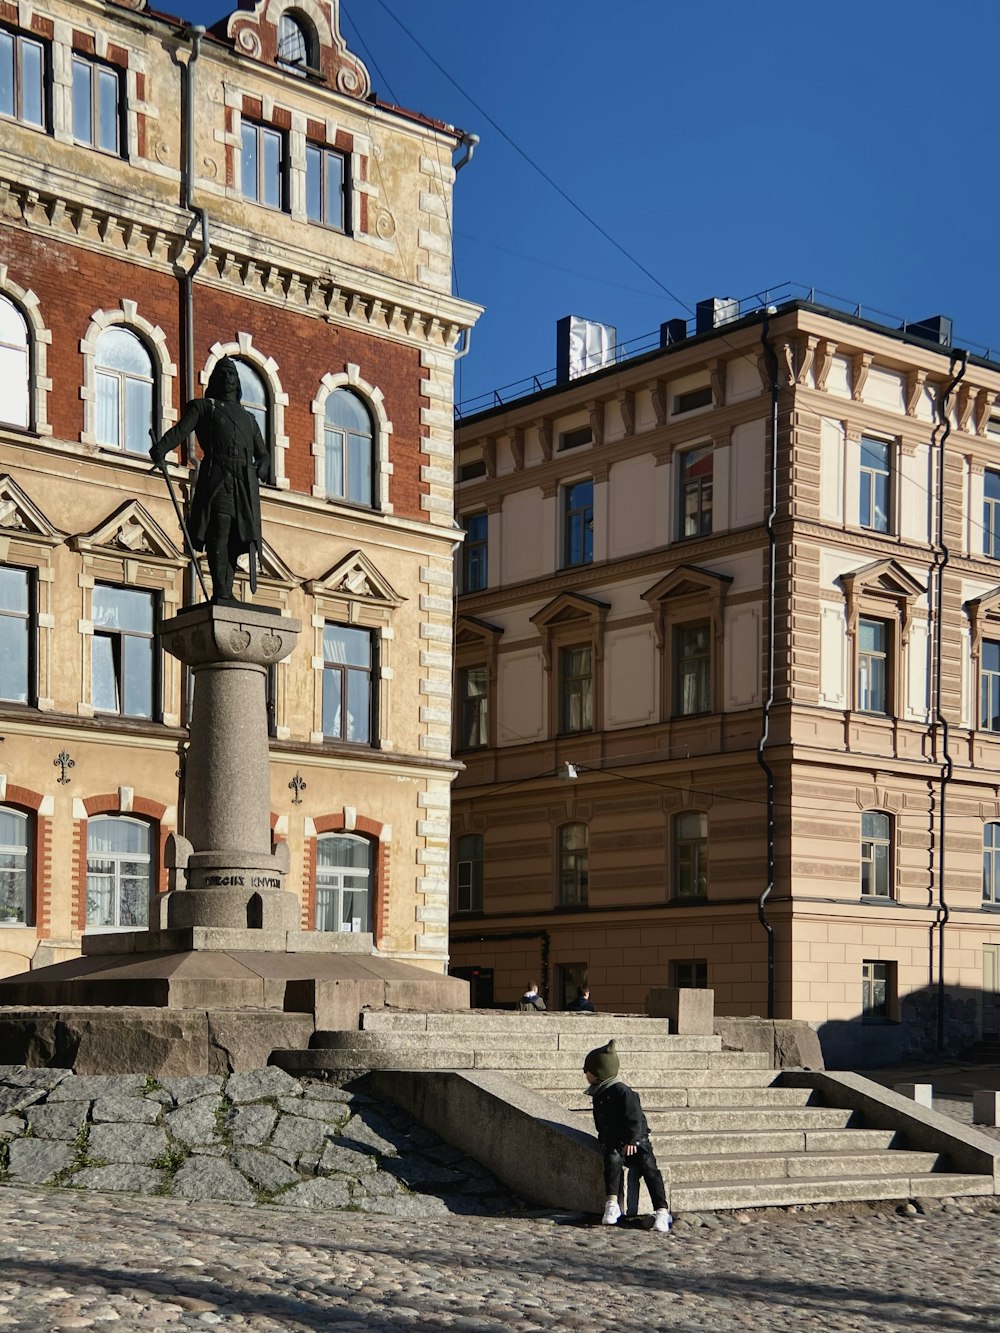 a statue of a man on a pedestal in front of a building